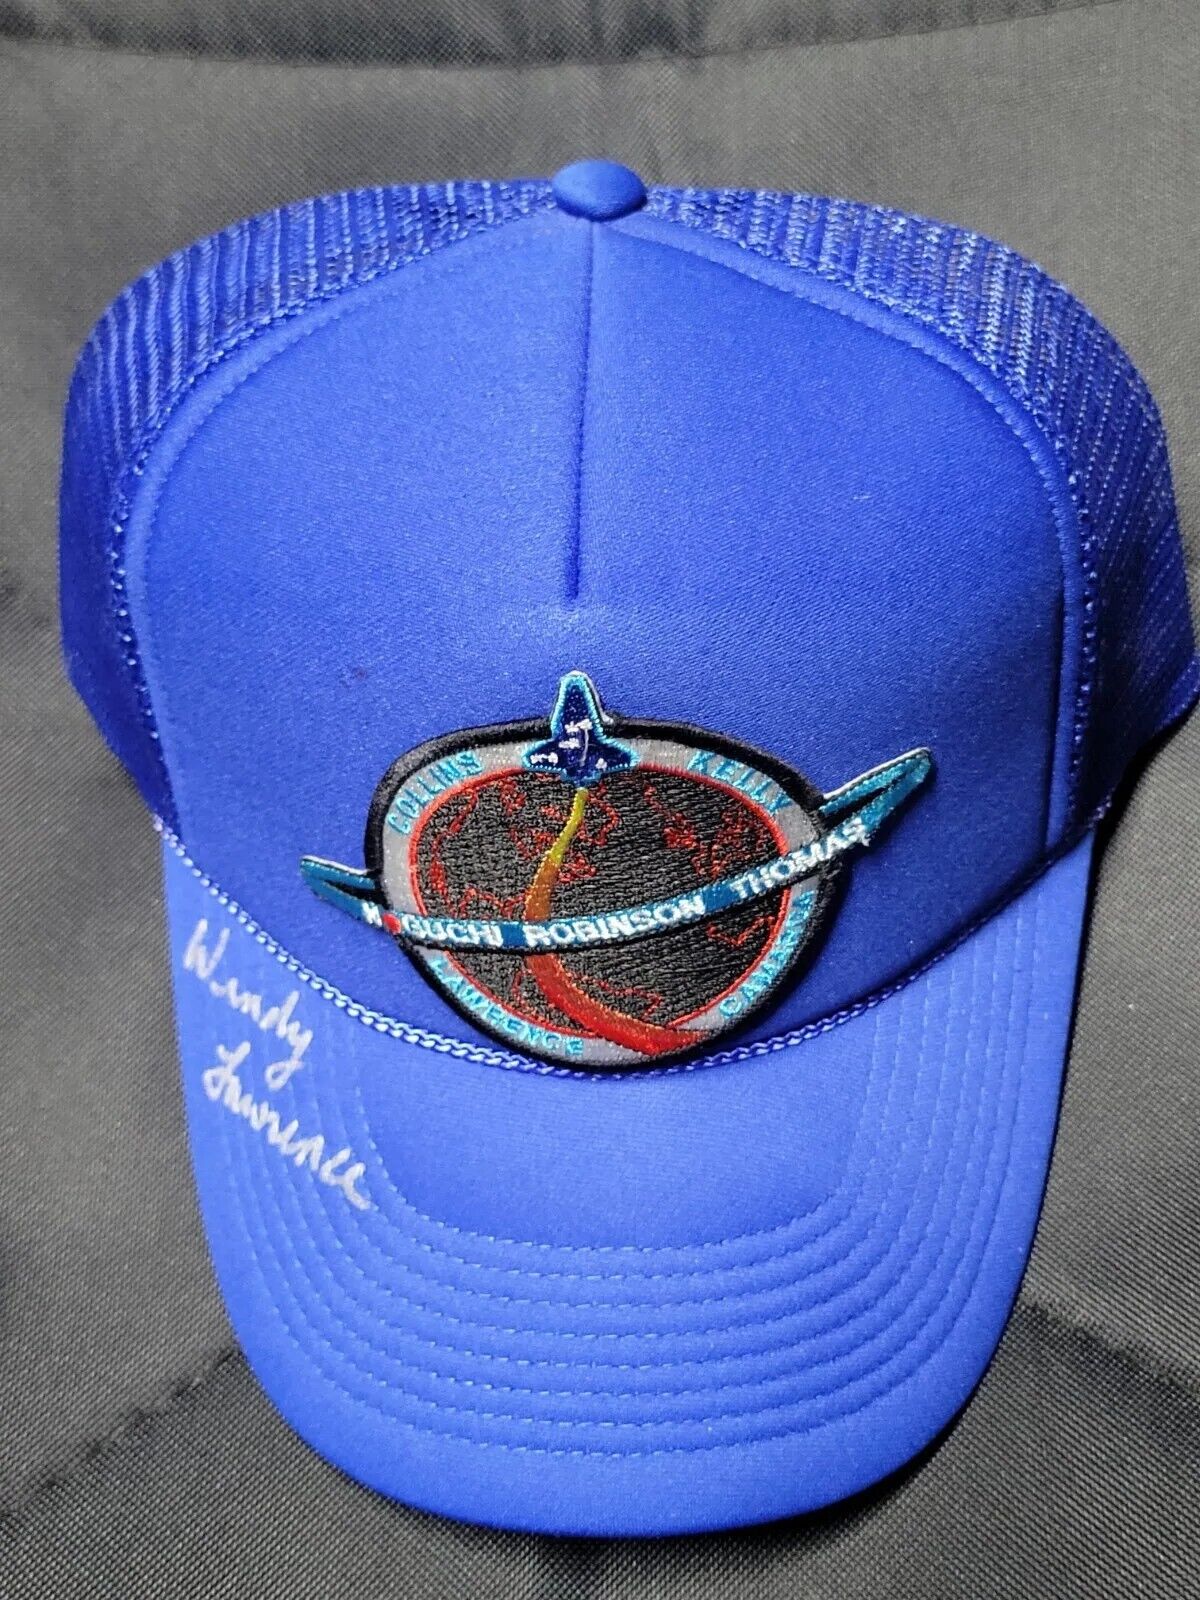 STS-114 SPACE SHUTTLE DISCOVERY NASA CAP SIGNED  BY Crew Member WENDY LAWRENCE